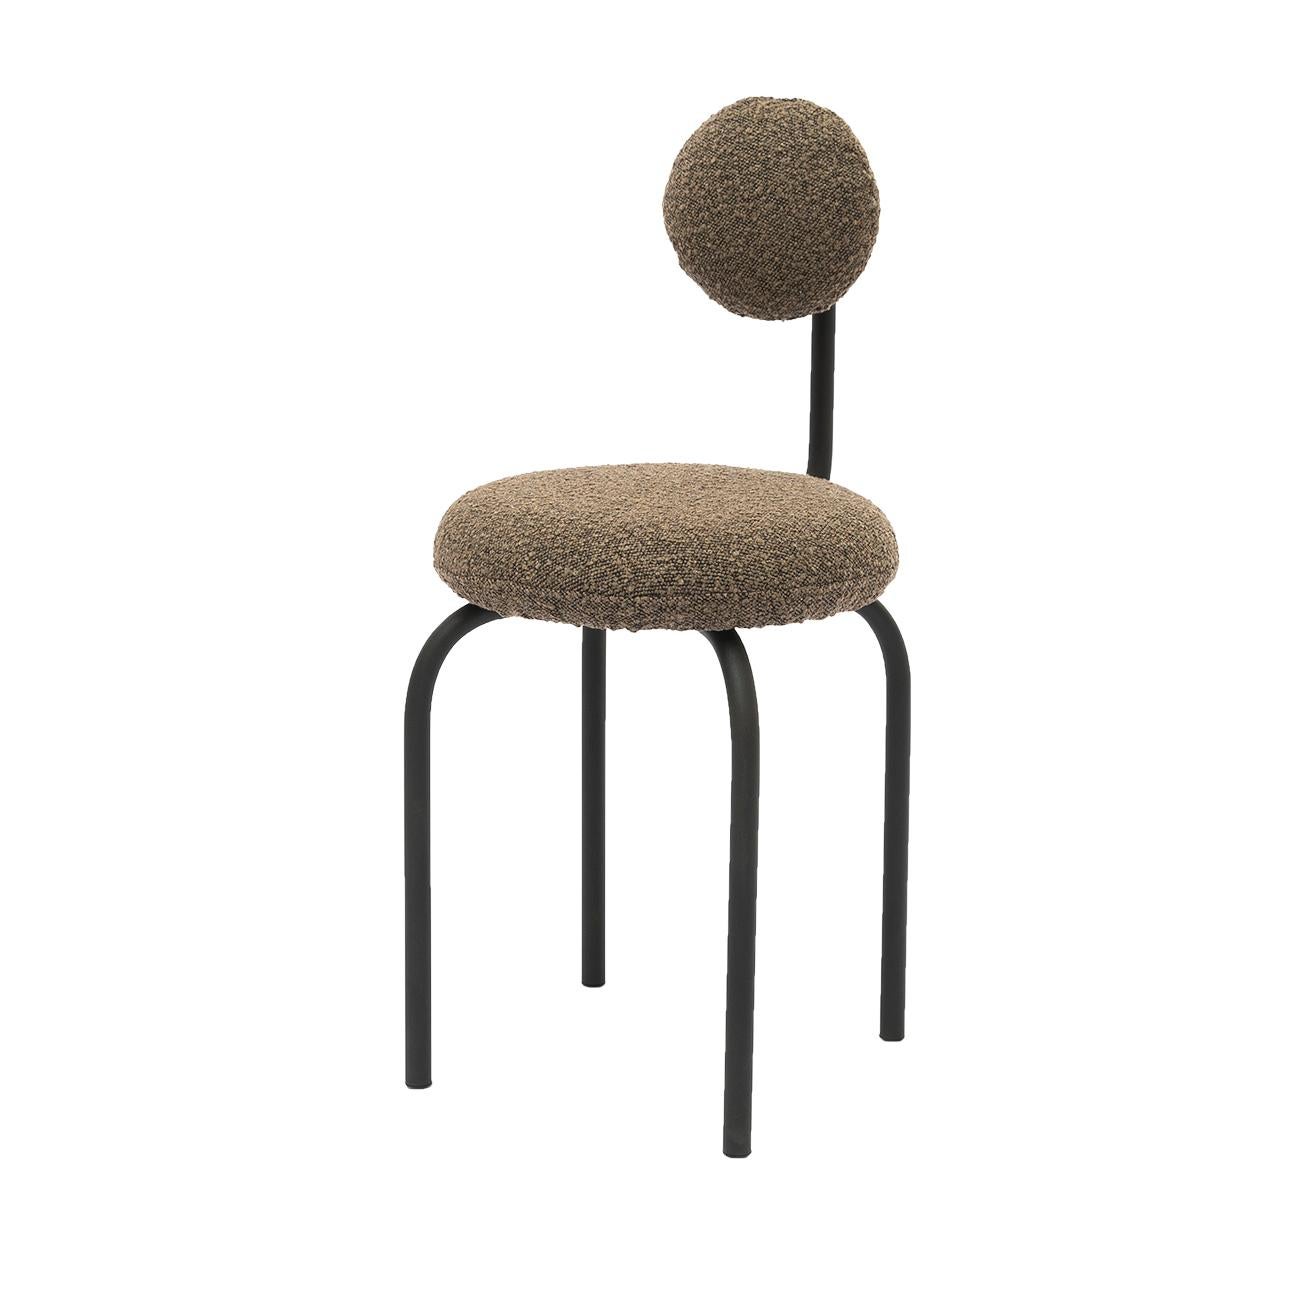 Object 077 Chair by NG Design
Dimensions: W 44 x D 50 x H 78 cm
Materials: Bouclé Fabric, Powder-Coated Steel

Also Available: All of objects available in different materials and colors on demand.

The Object 077 Chair is comfort and minimalism. The